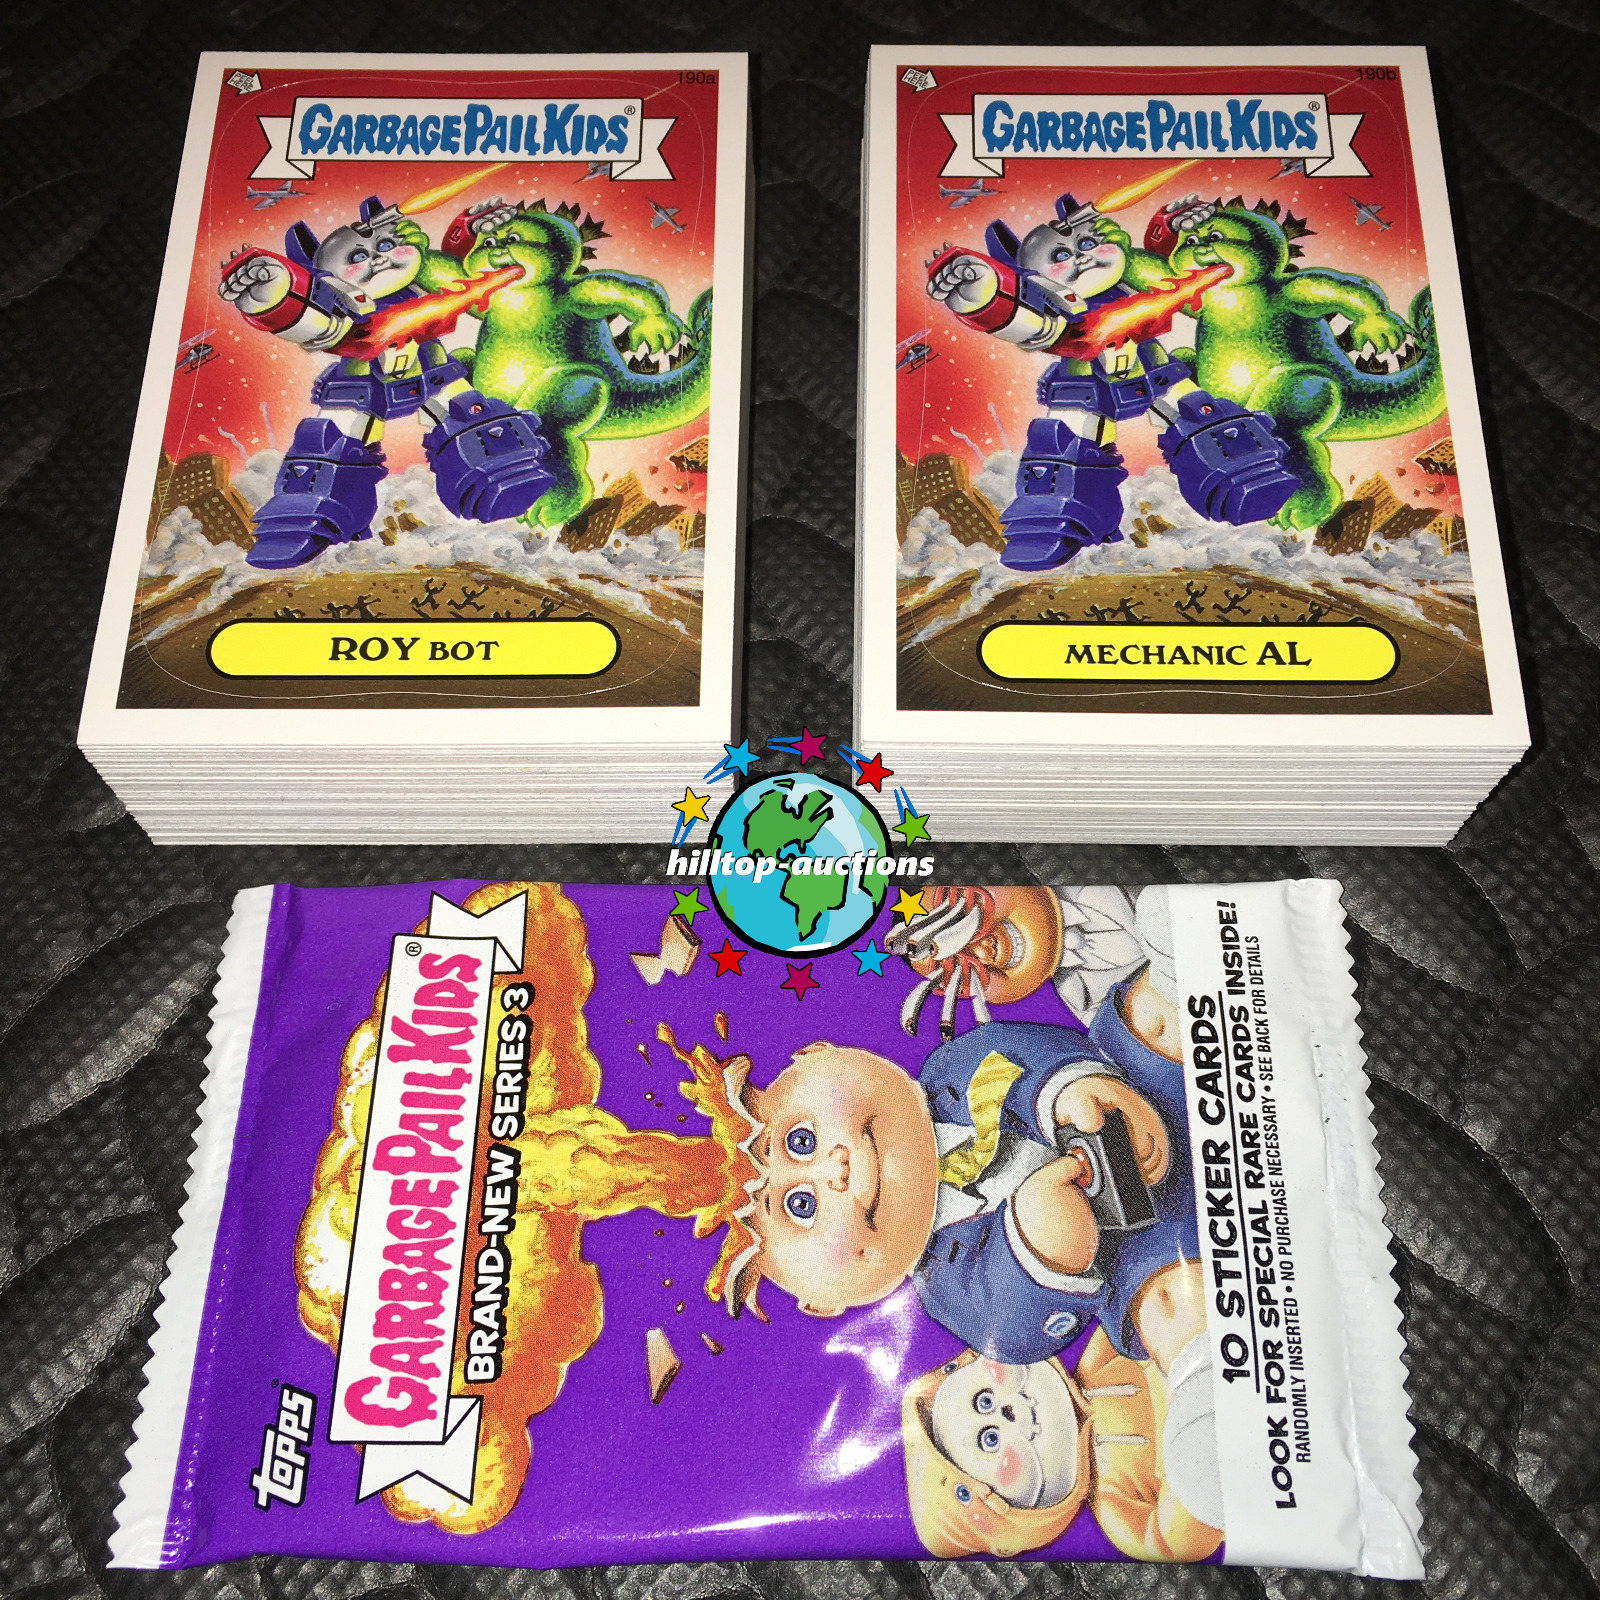 GARBAGE PAIL KIDS BNS3 COMPLETE 132-CARD SET 2013 BRAND-NEW SERIES 3 +WRAPPER